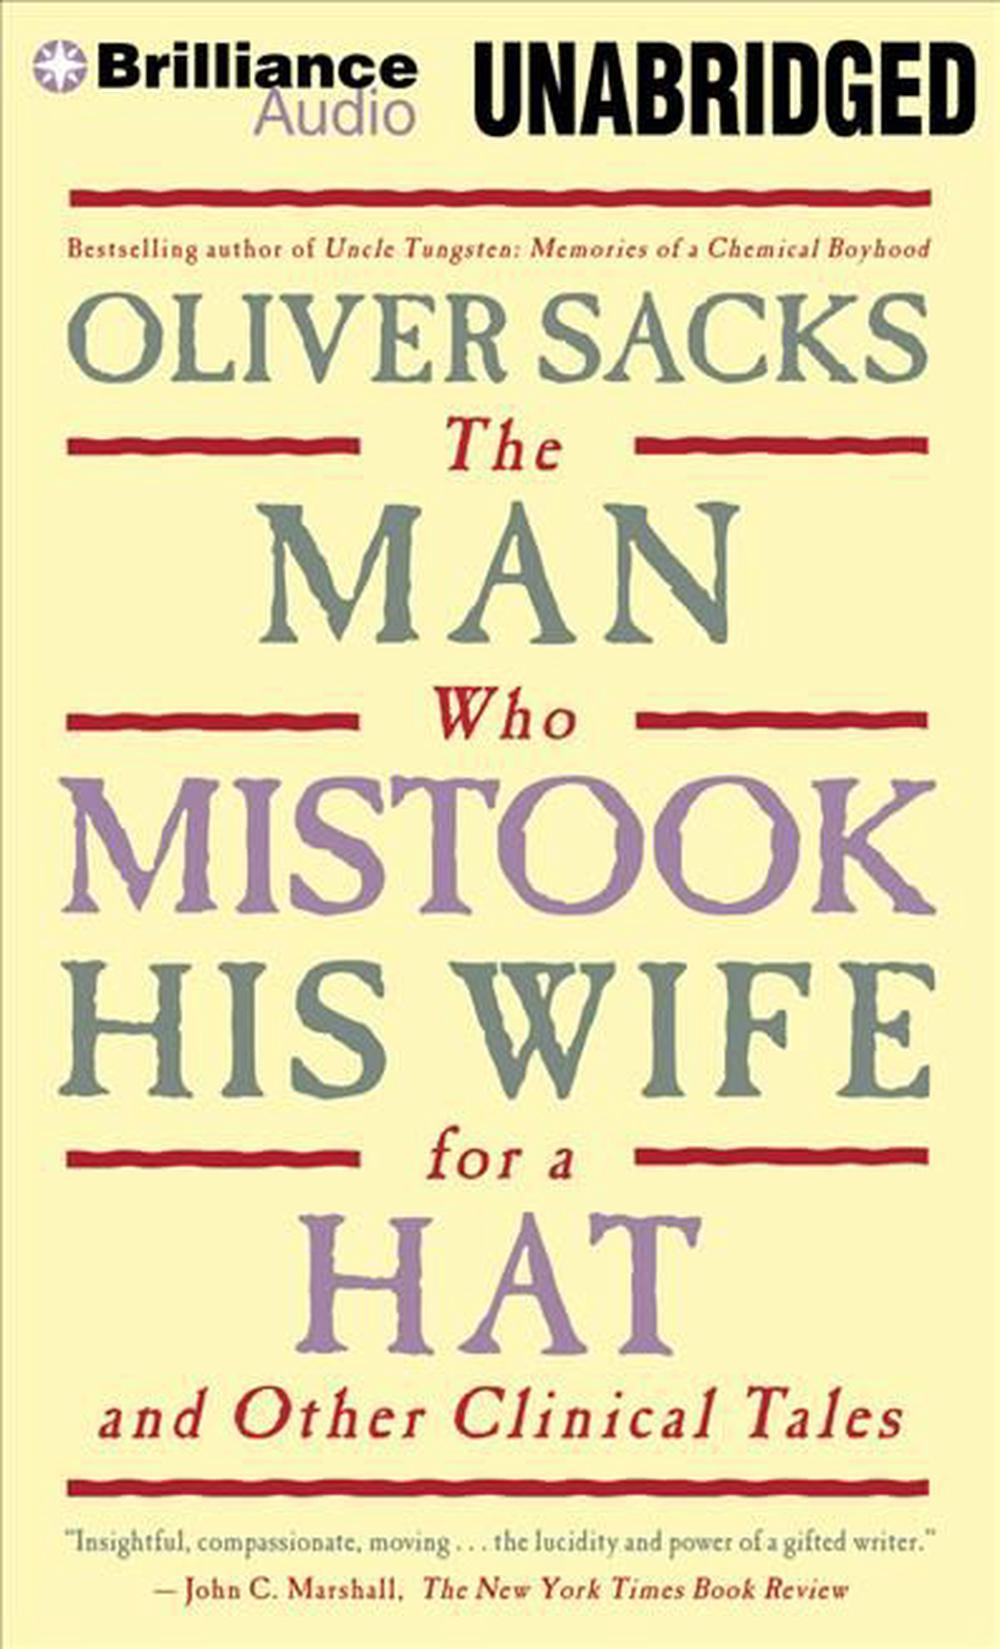 the man who mistook his wife for a hat by oliver sacks